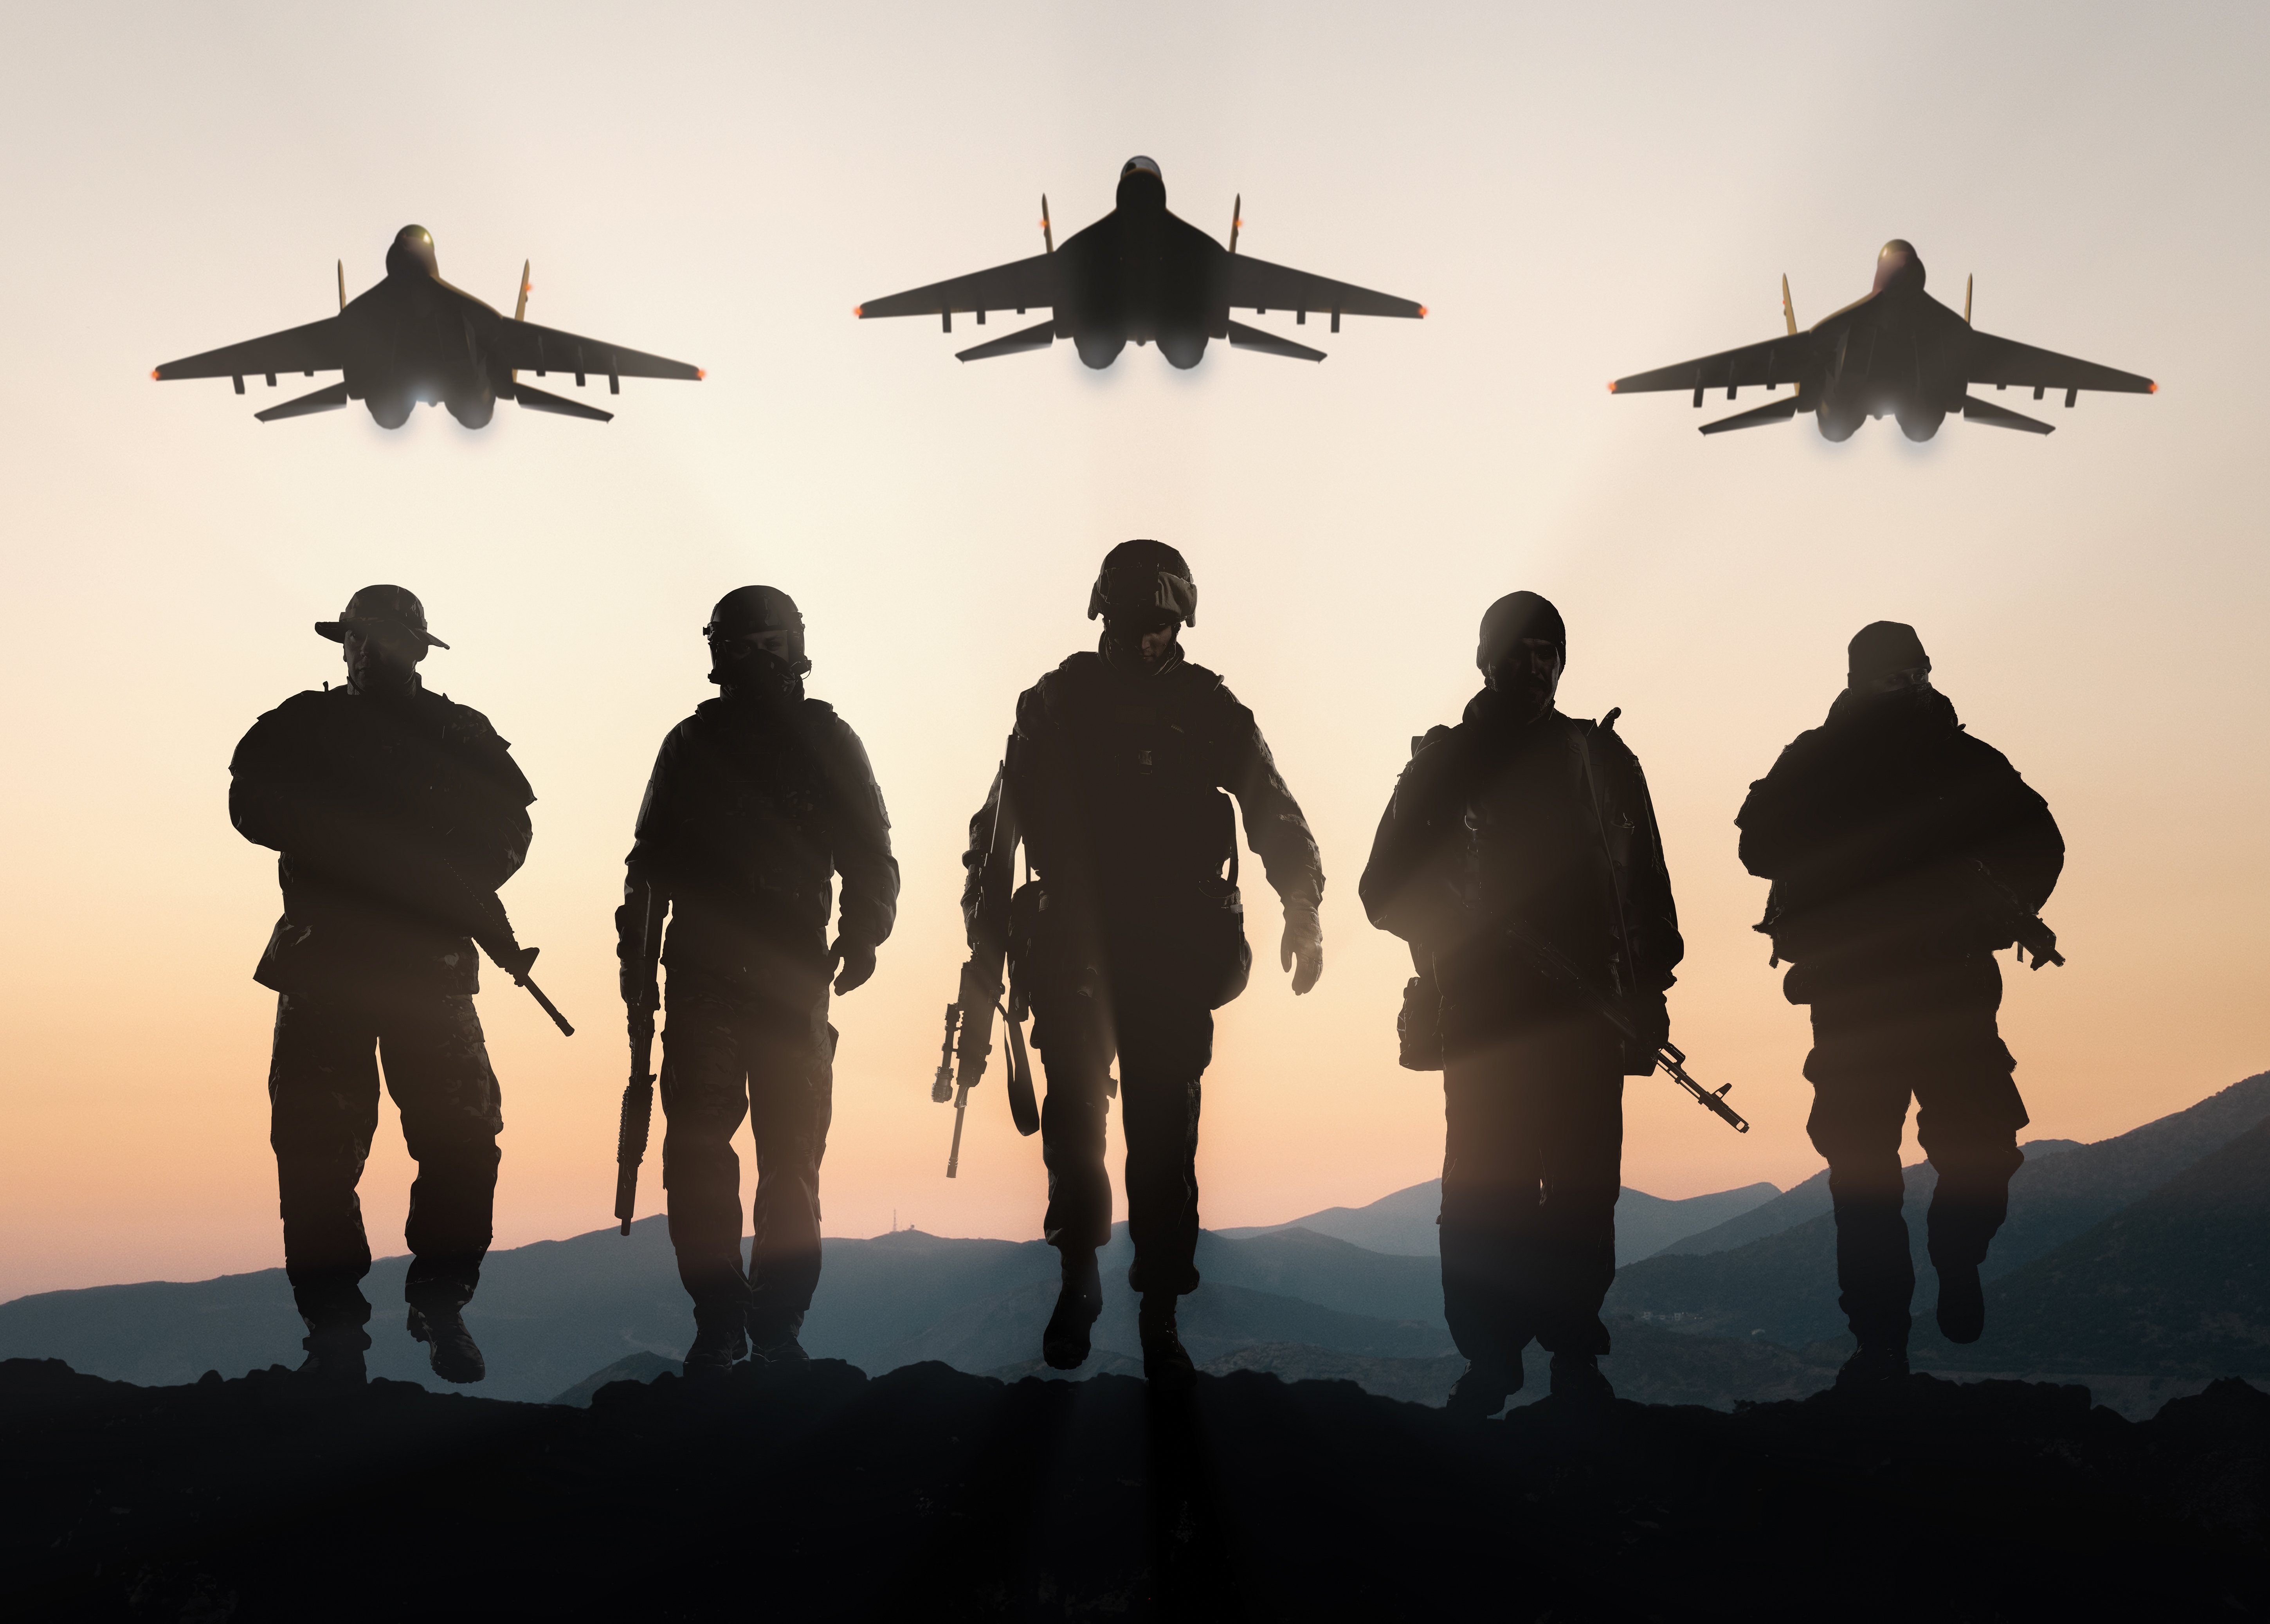 shutterstock- Military silhouettes of soldiers and airforce against the backdrop of sunset sky.